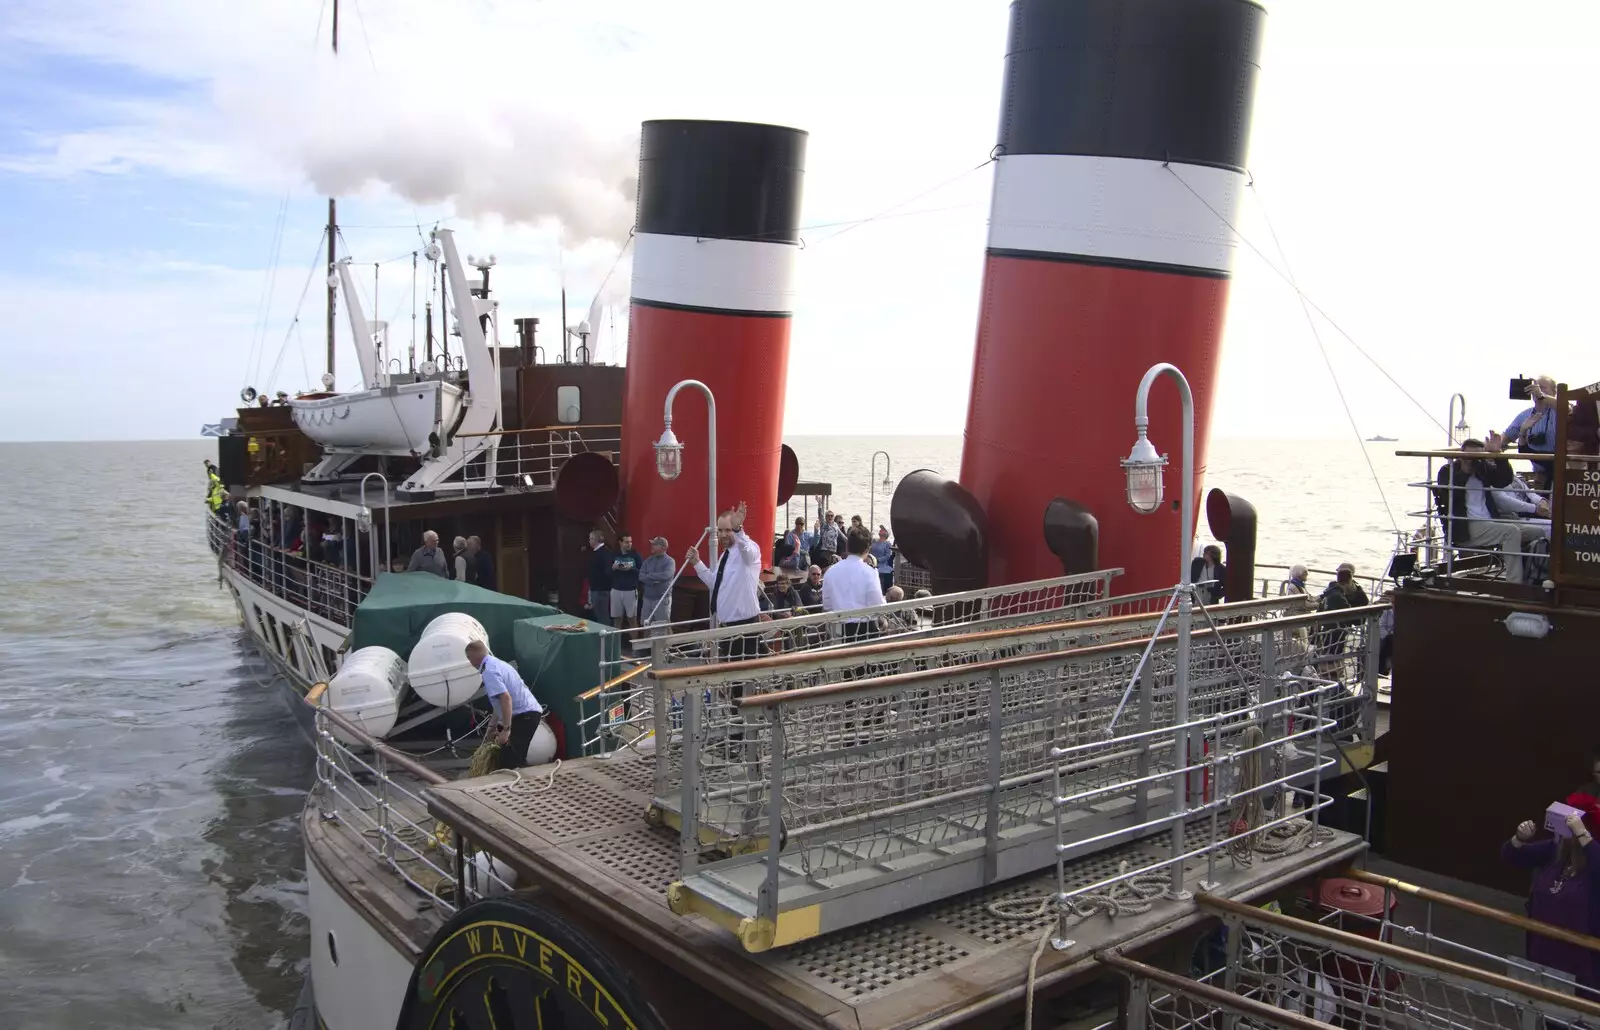 The steamer sets sail, from The Waverley Paddle Steamer at Southwold Pier, Suffolk - 27th September 2023